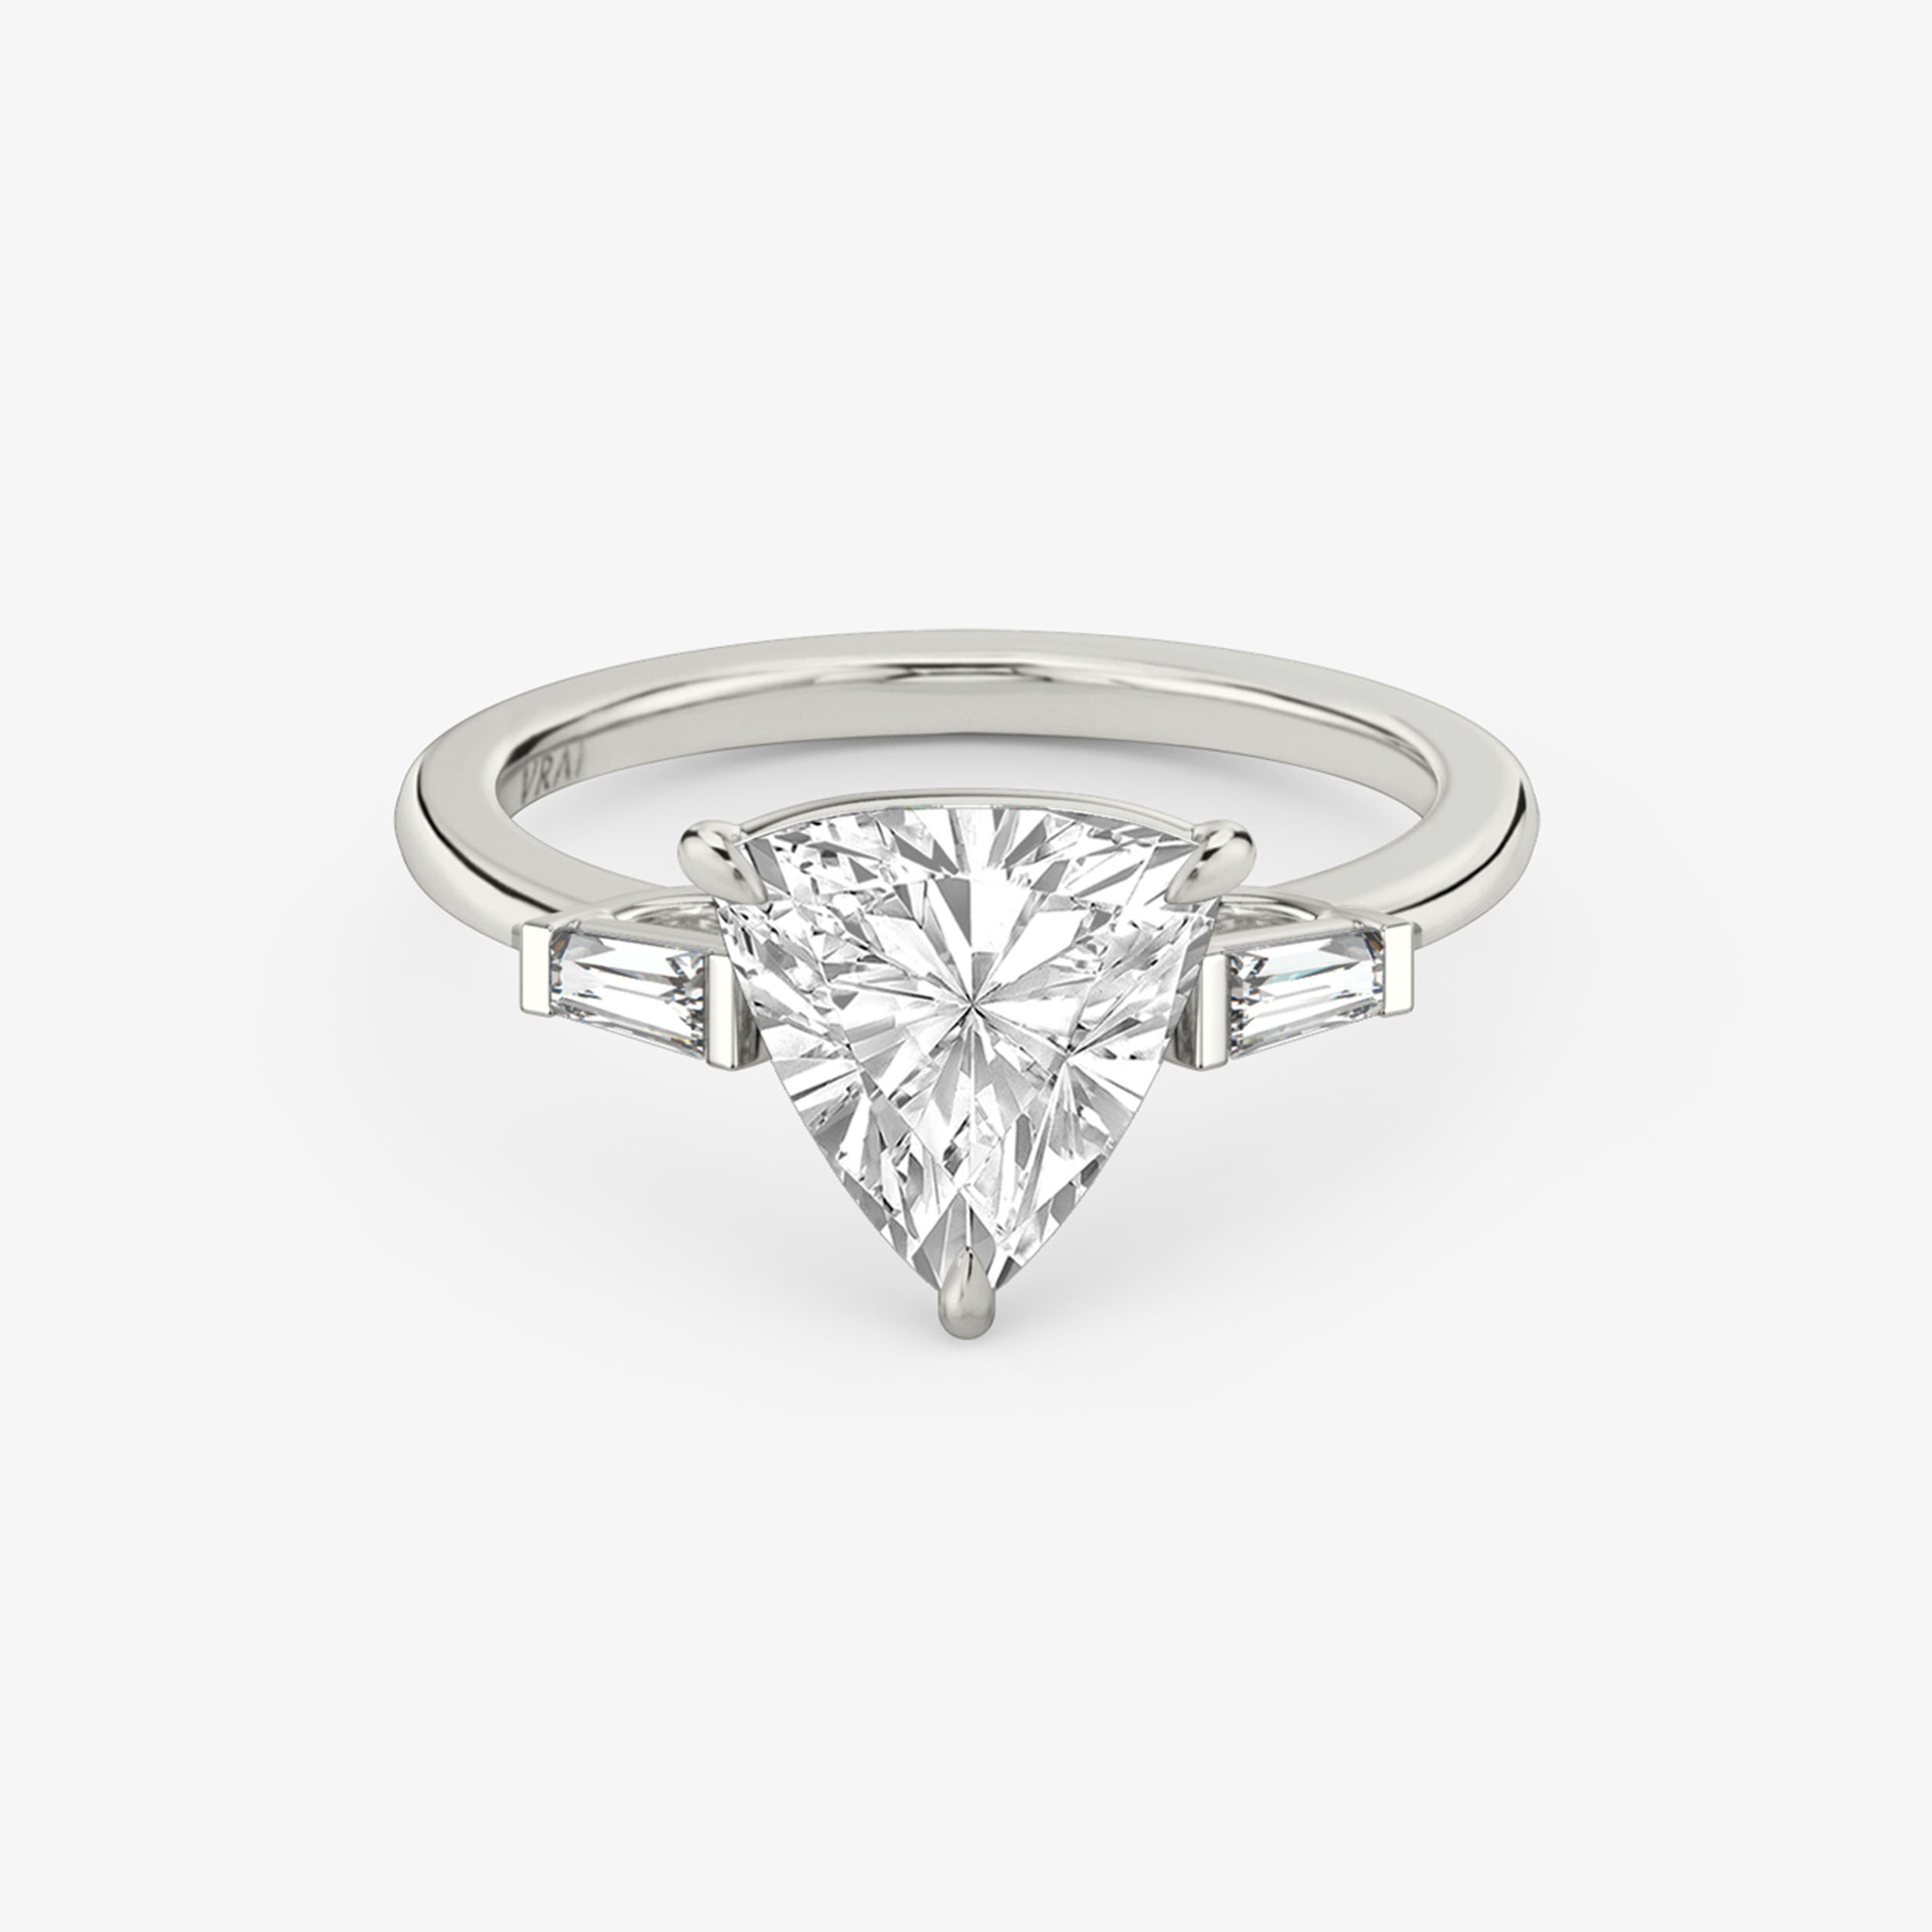 20s style engagement rings OFF 59% |Newest